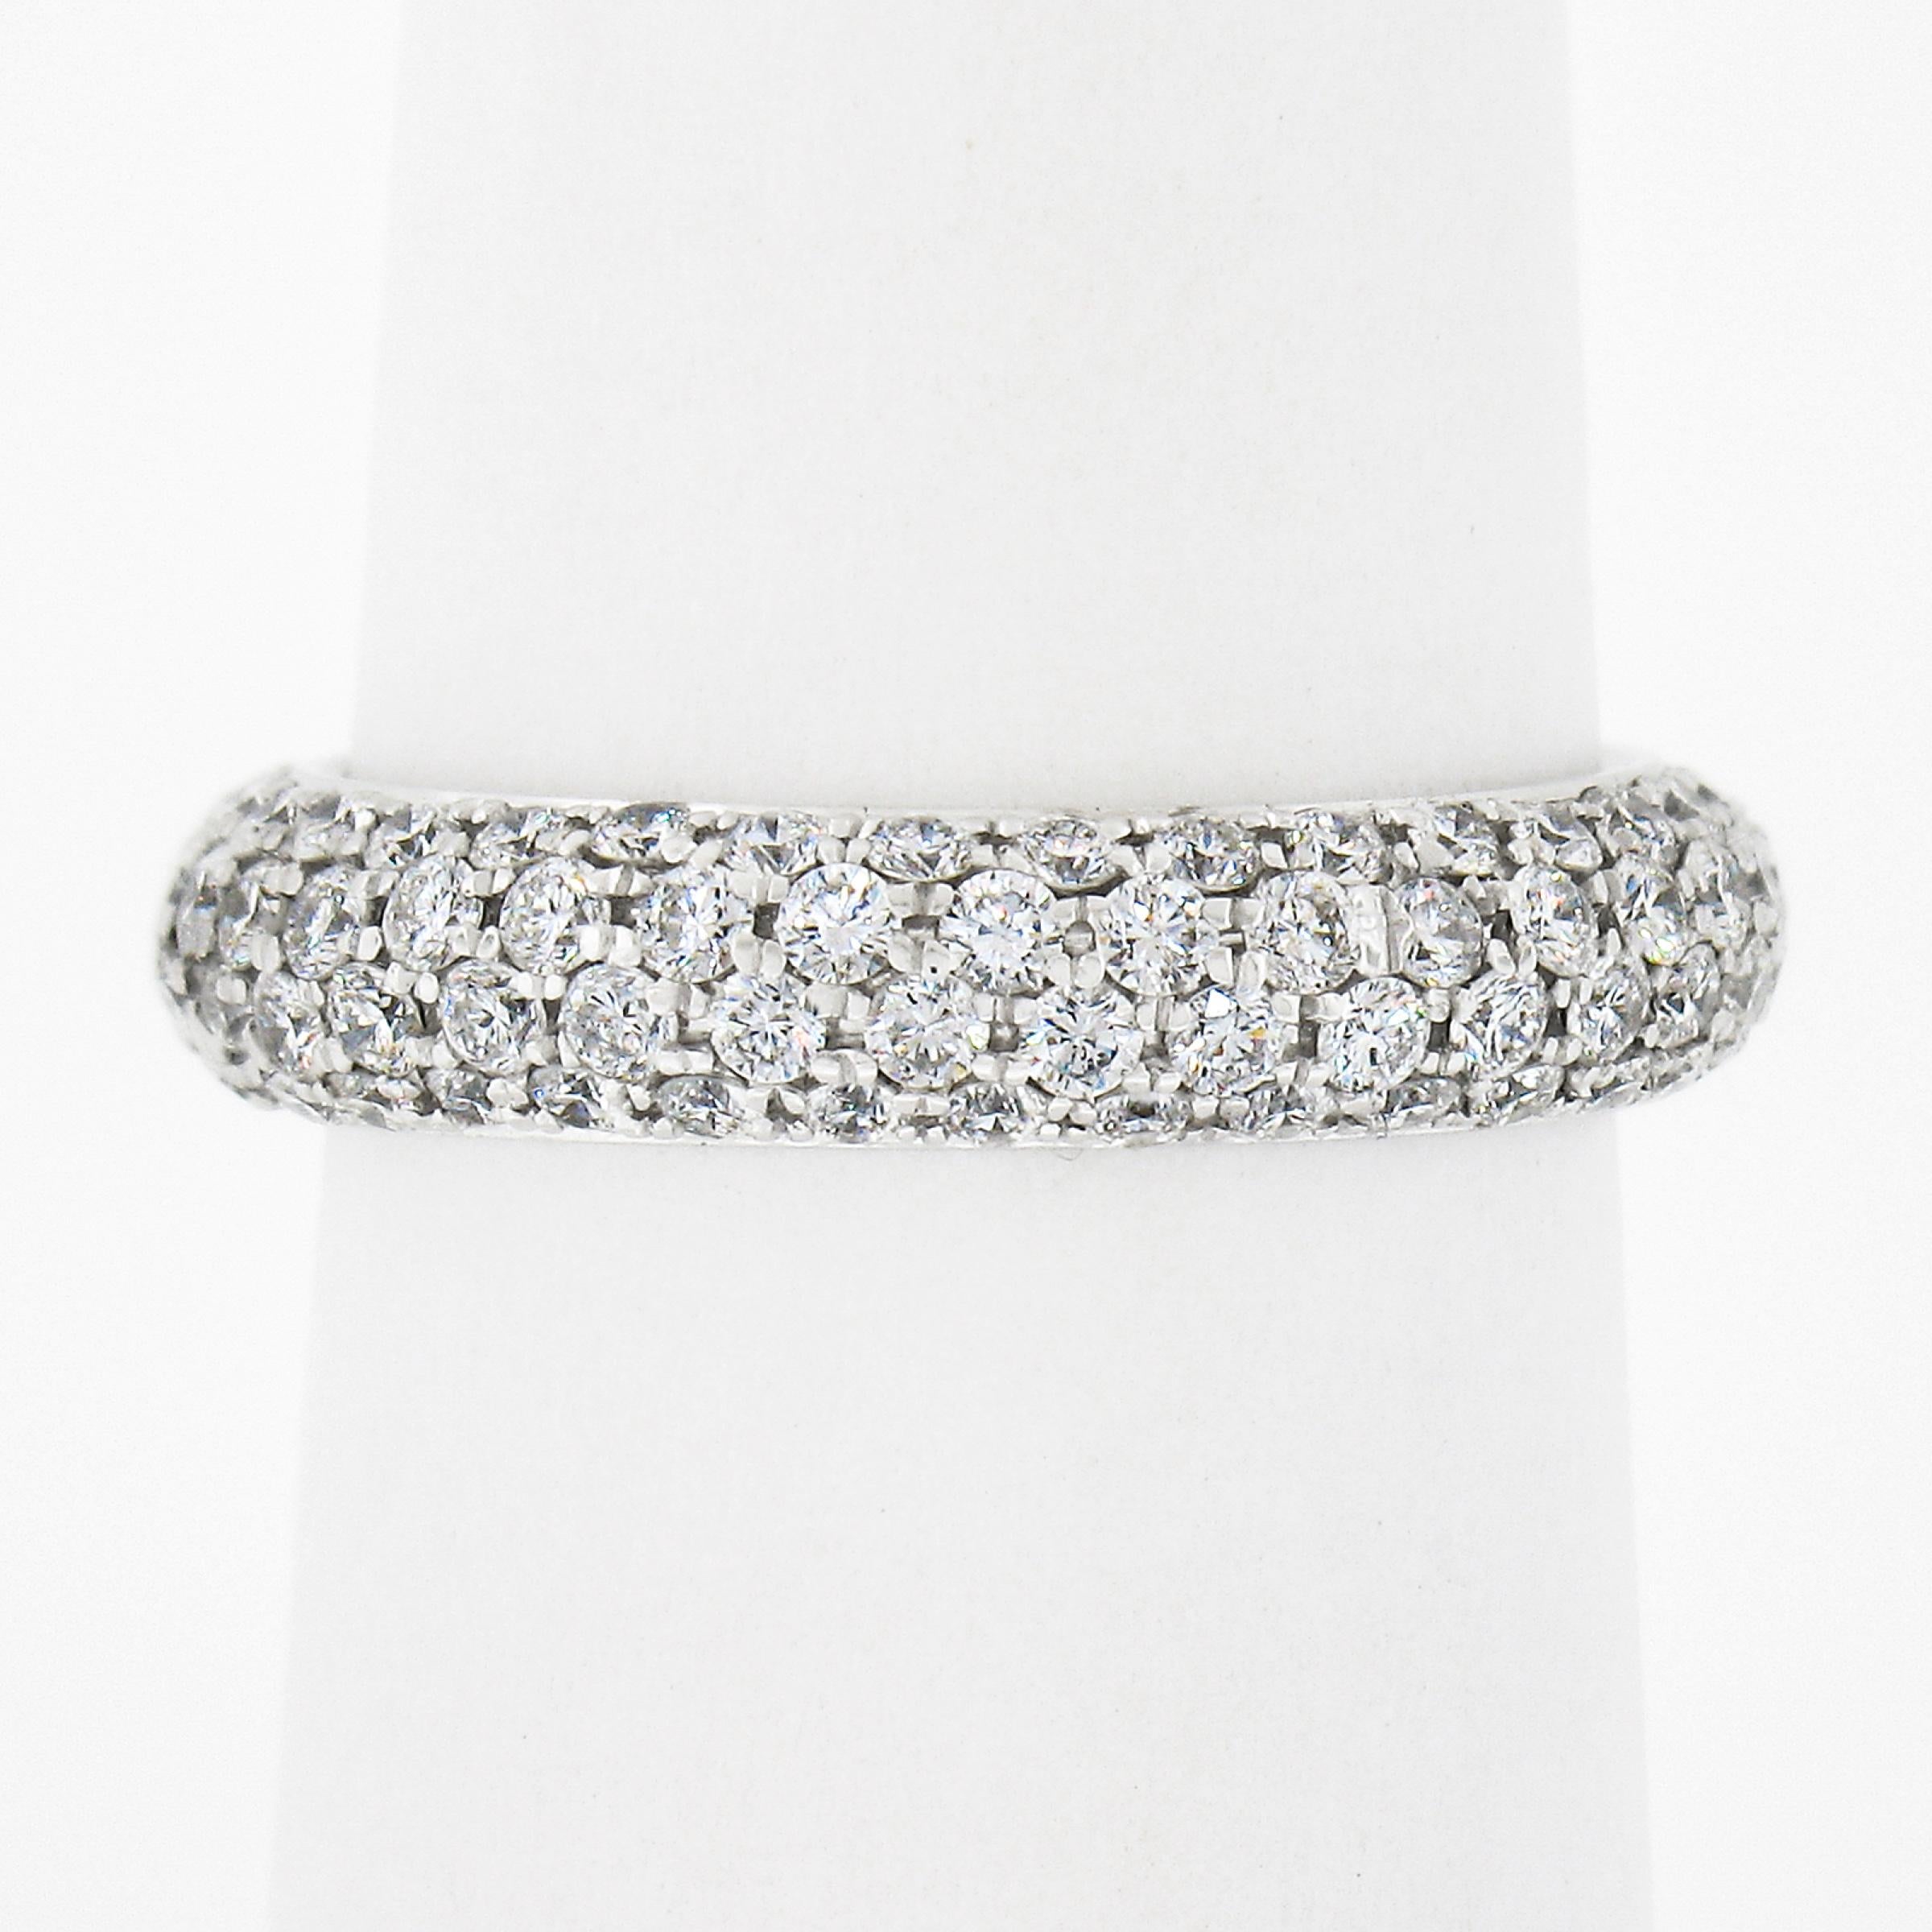 This gorgeous eternity band ring is crafted in solid 18k white gold and features 4 rows of stunning diamonds elegantly drenched throughout its domed surface in a neat pave setting style. The diamonds are very nice quality having wonderful G/H color,